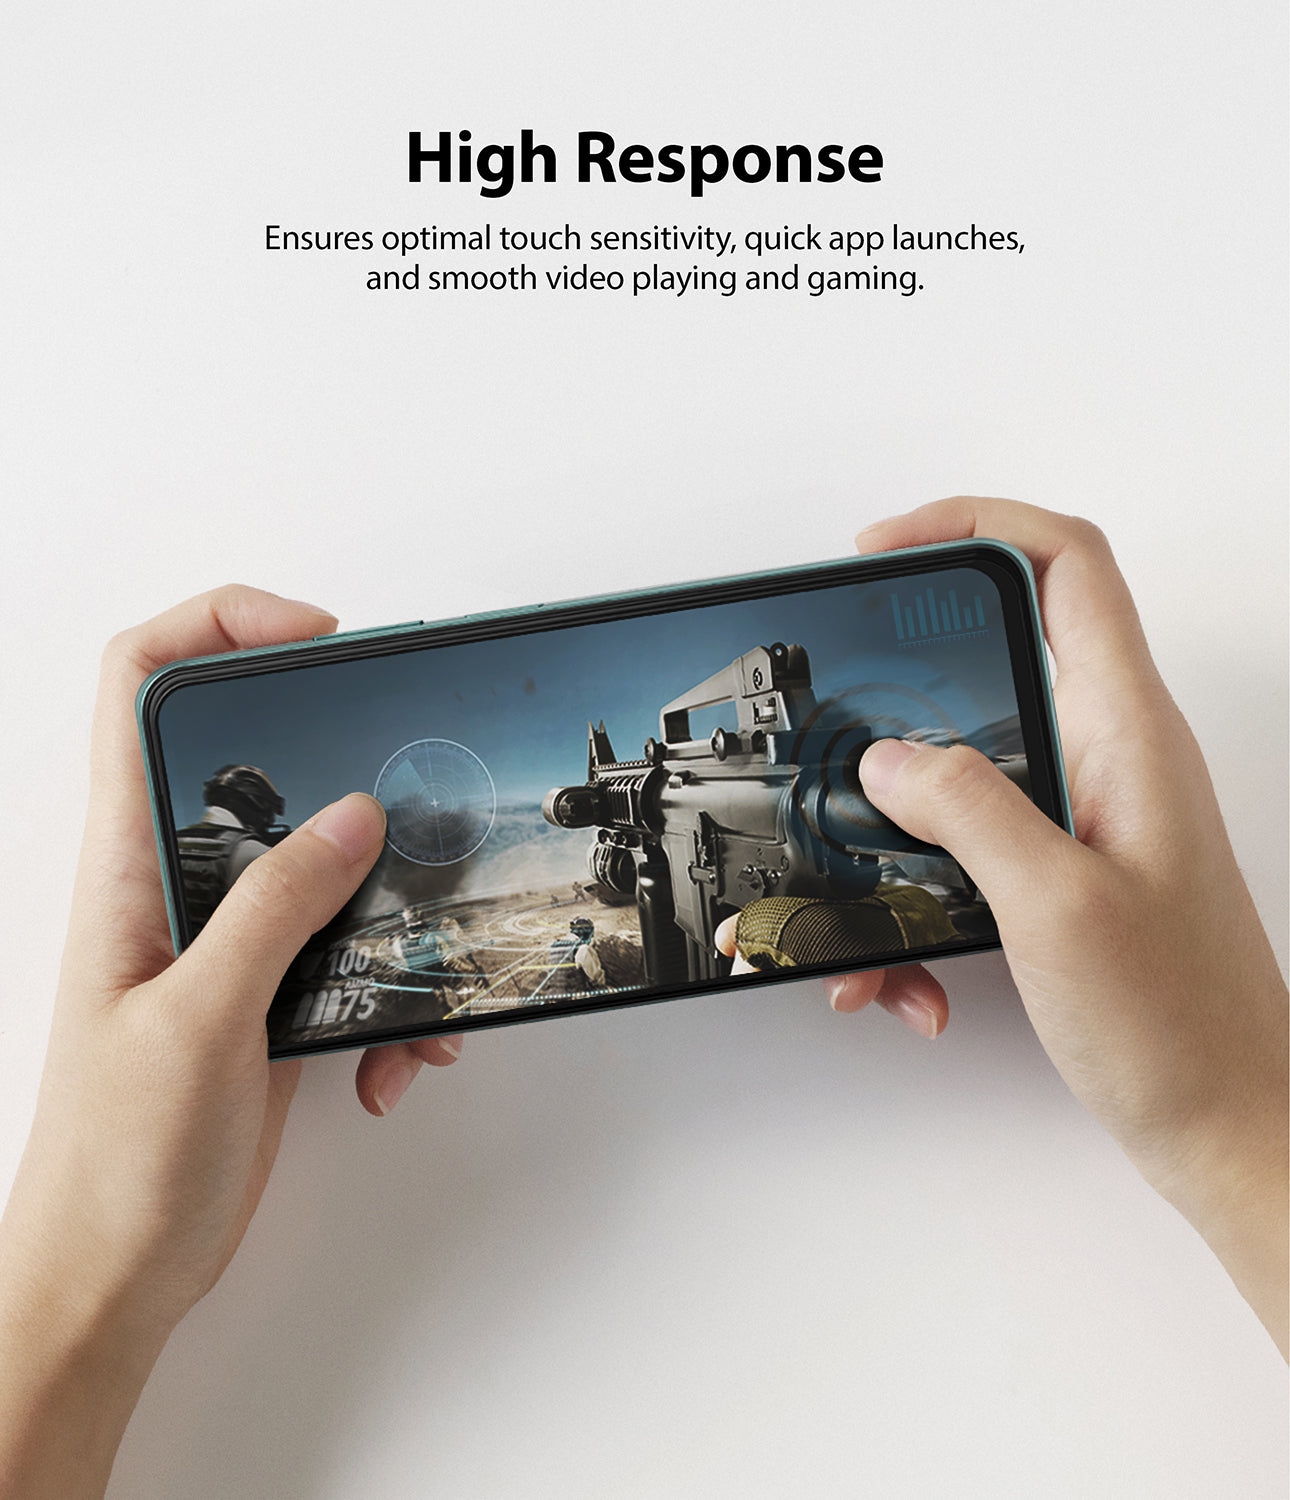 high response ensures optimal touch sensitivity, quick app launching, and smooth video playing